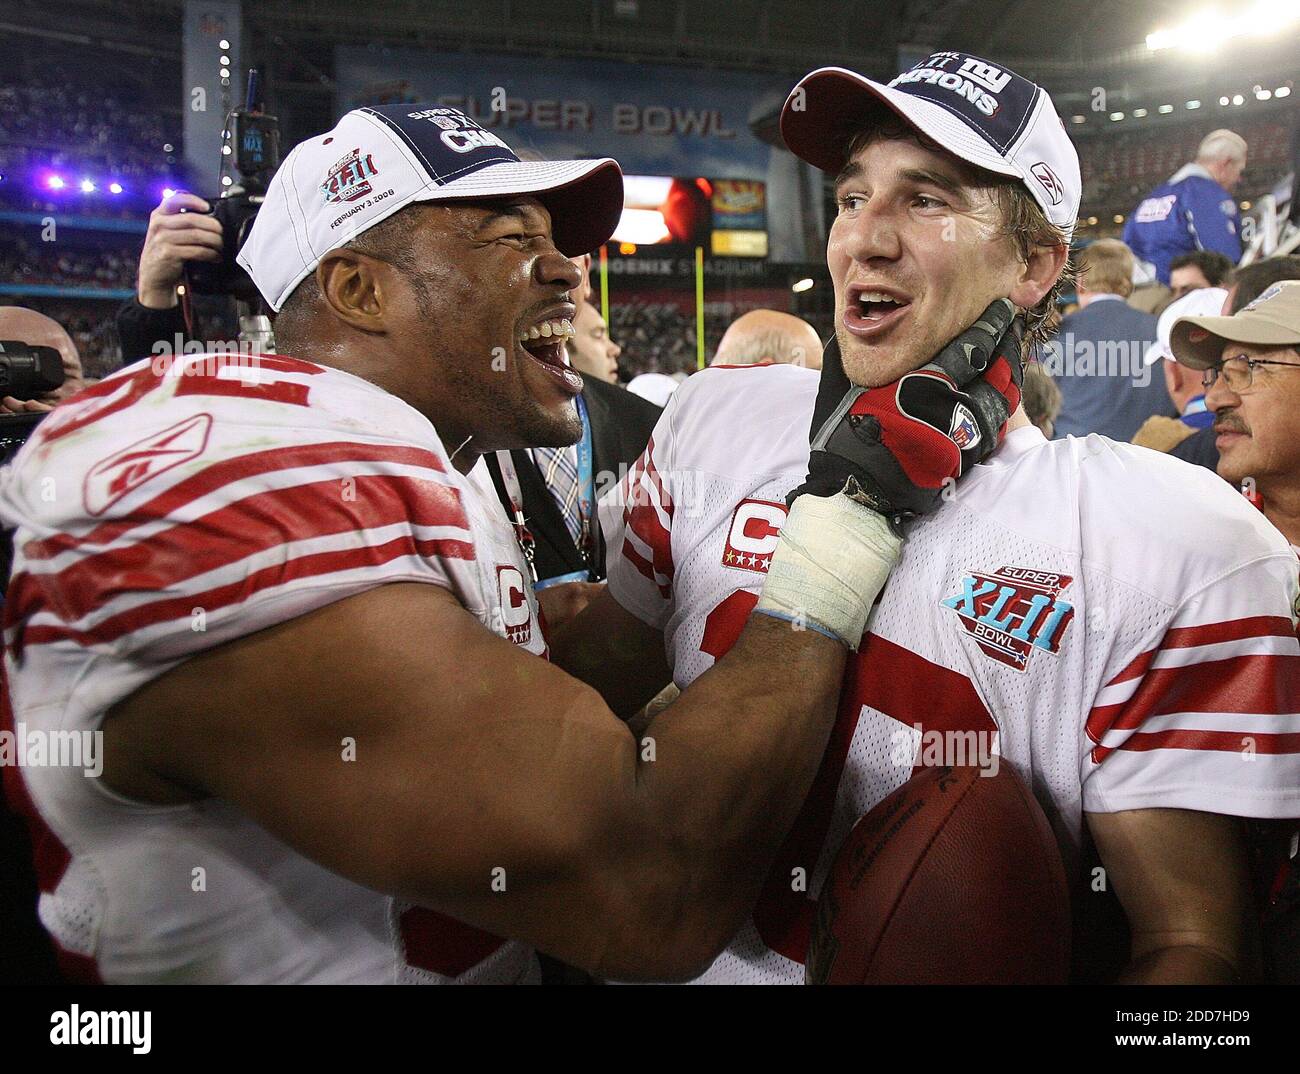 The New York Giants' Tom Strahan, left, and Eli Manning celebrate after a 17-14 Giants' victory in Super Bowl XLII at University of Phoenix Stadium in Glendale, AZ, USA on February 3, 2008.  The NY Giants won 17-14. Photo by Gary W. Green/MCT/Cameleon/ABACAPRESS.COM Stock Photo